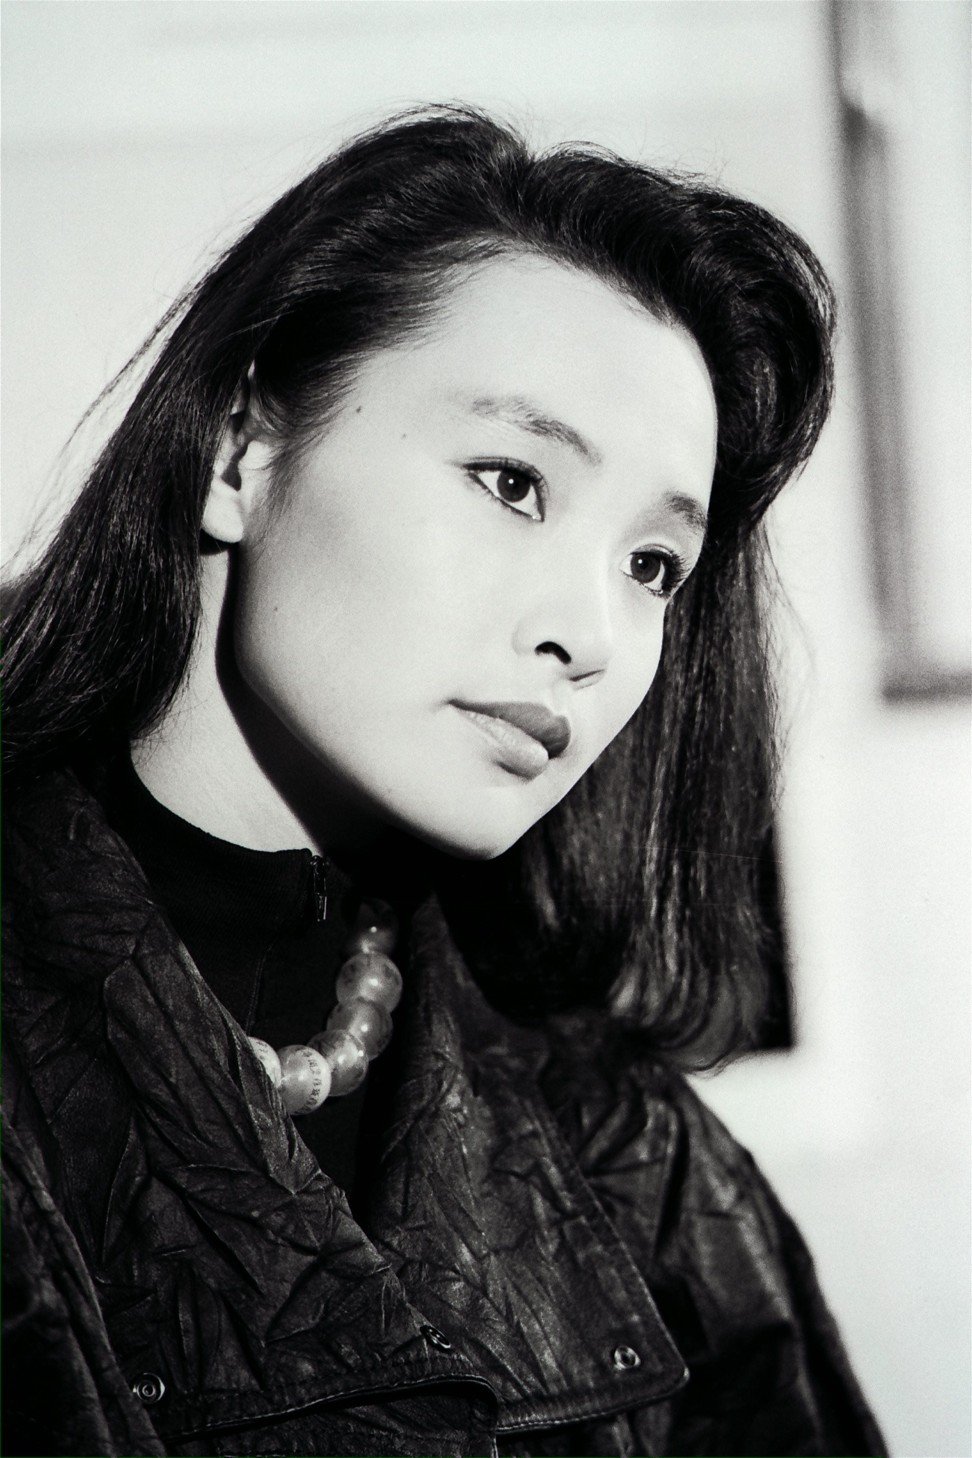 Archive photo of Chen from 1988. Photo: P.Y. Tang